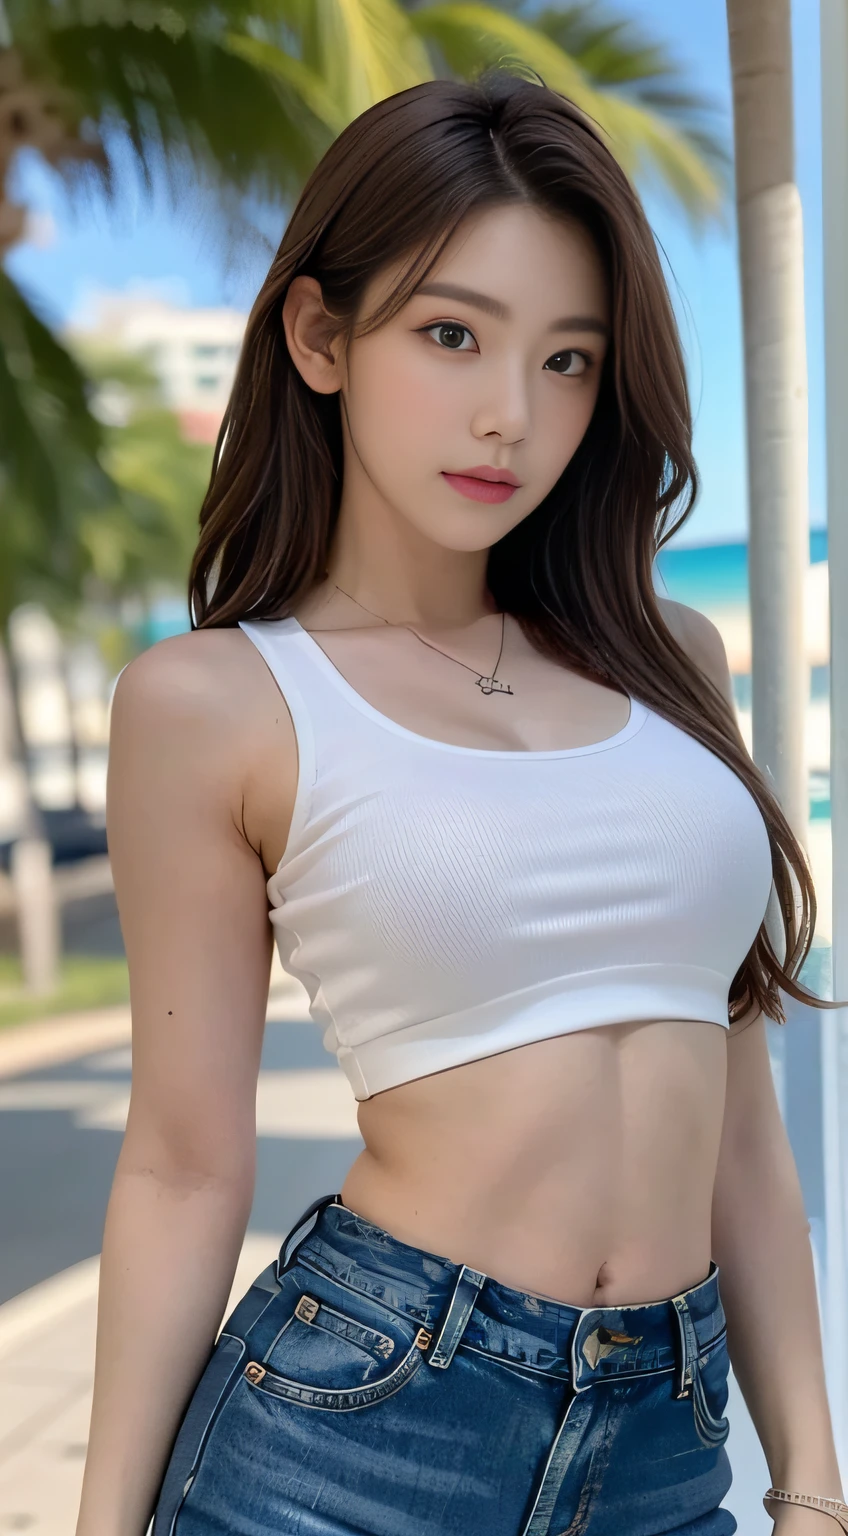 ((Top Quality, 8k, Masterpiece: 1.3)), Sharp Focus: 1.2, Beautiful Women in Perfect Style: 1.4, Slender Abs: 1.2, ((Dark Brown Hair, Big: 1.2)), Angel Face, Detailed Face, Beautiful Girl, Cute, White T-shrt, Jeans, Pendant, Waikiki Beach: 1.2, Palm Tree, (Front Shot), (Full Length Photo: 1.3,), Highly detailed face and skin texture, detailed eyes, double eyelids